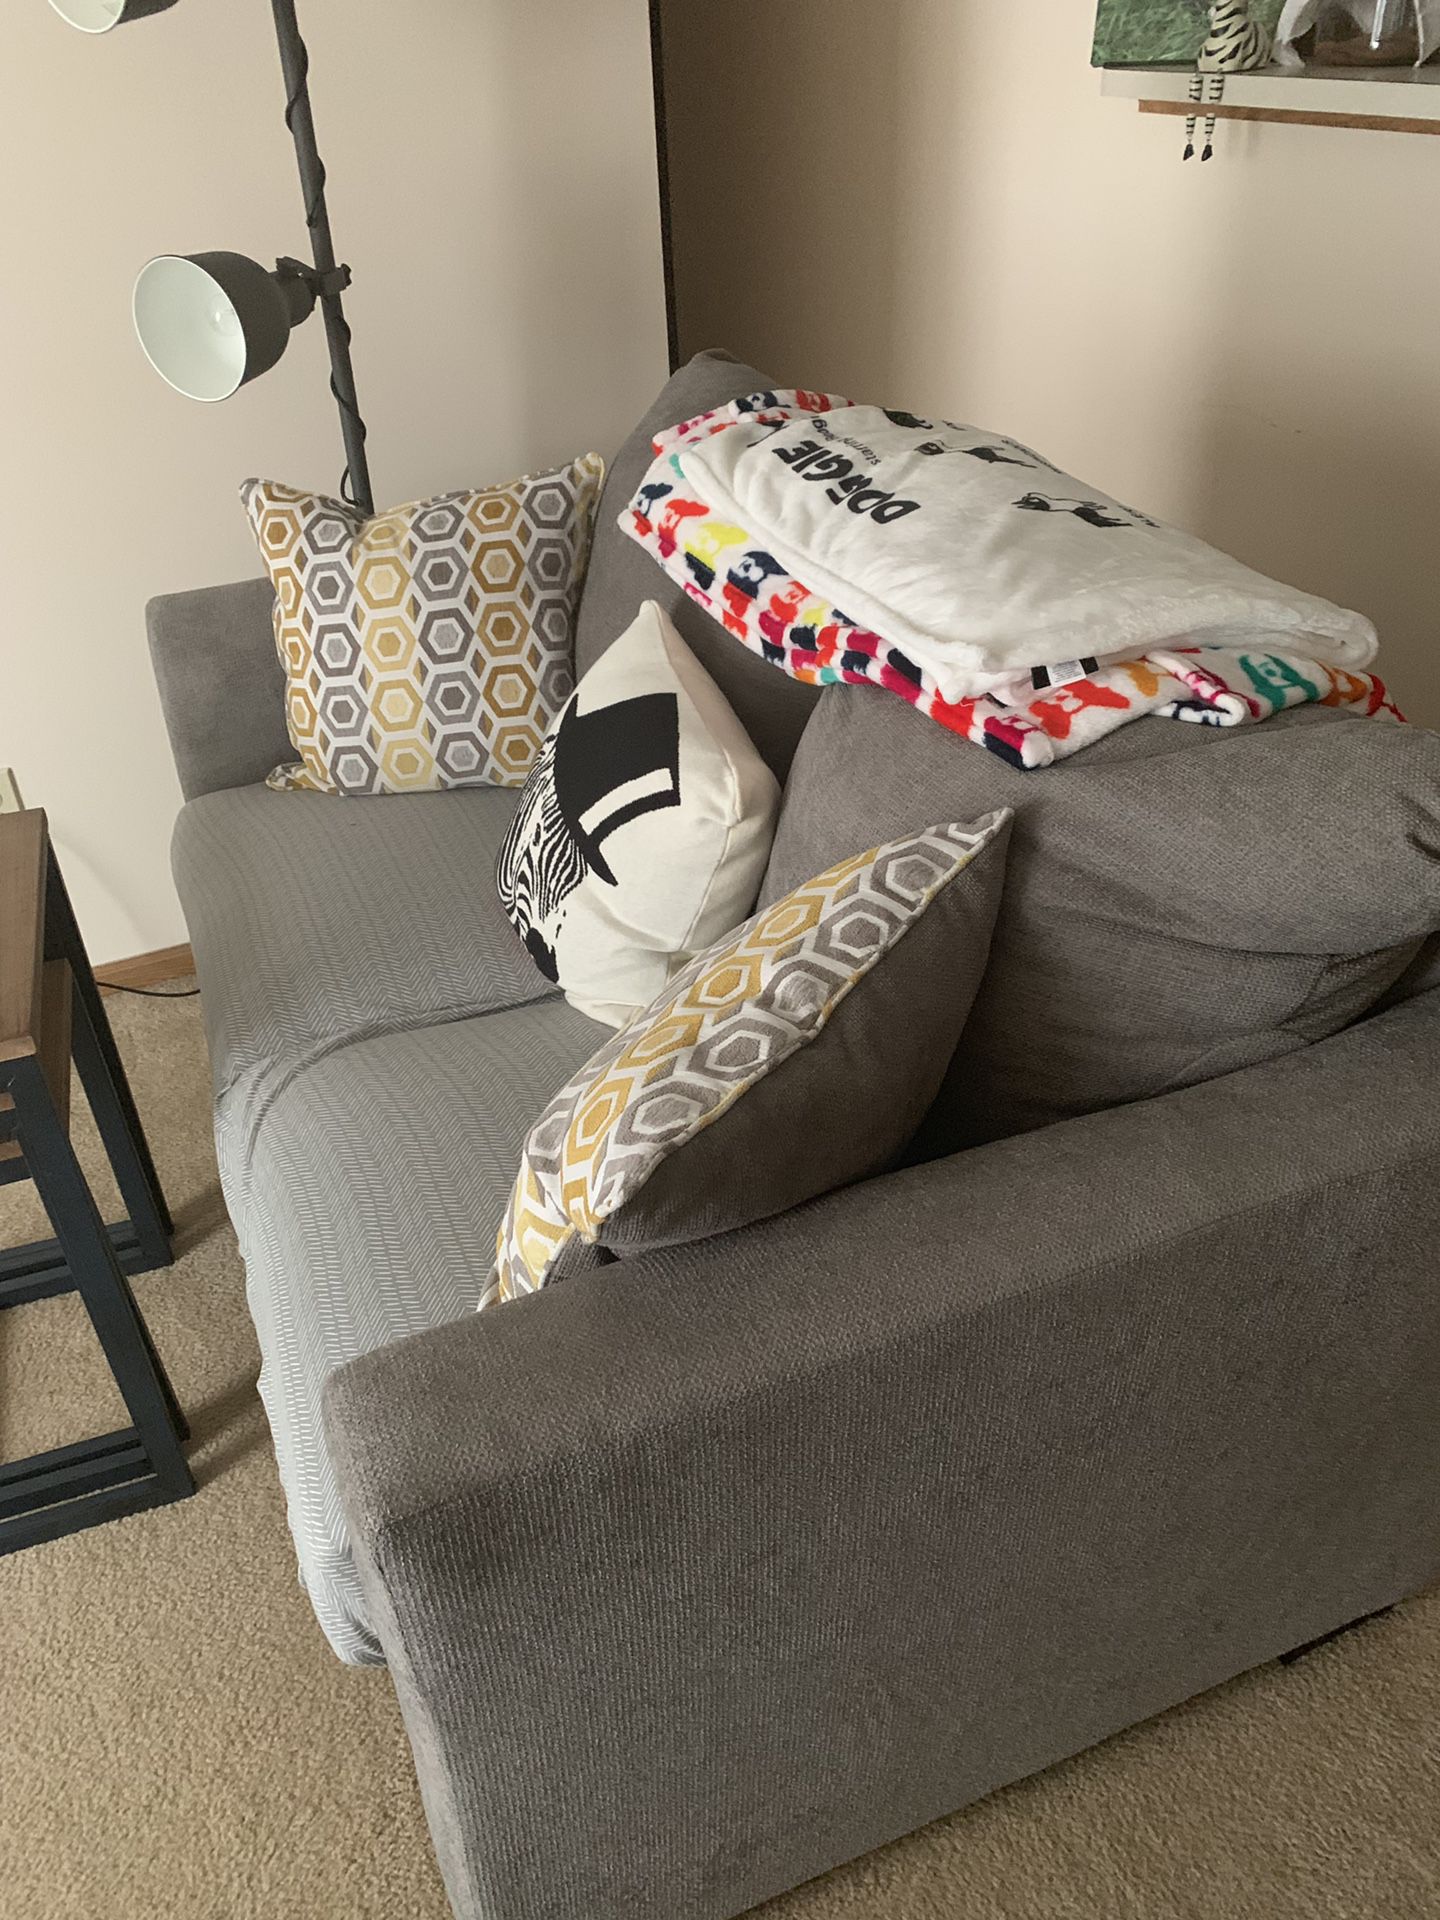 Practically New Sofa and Loveseat